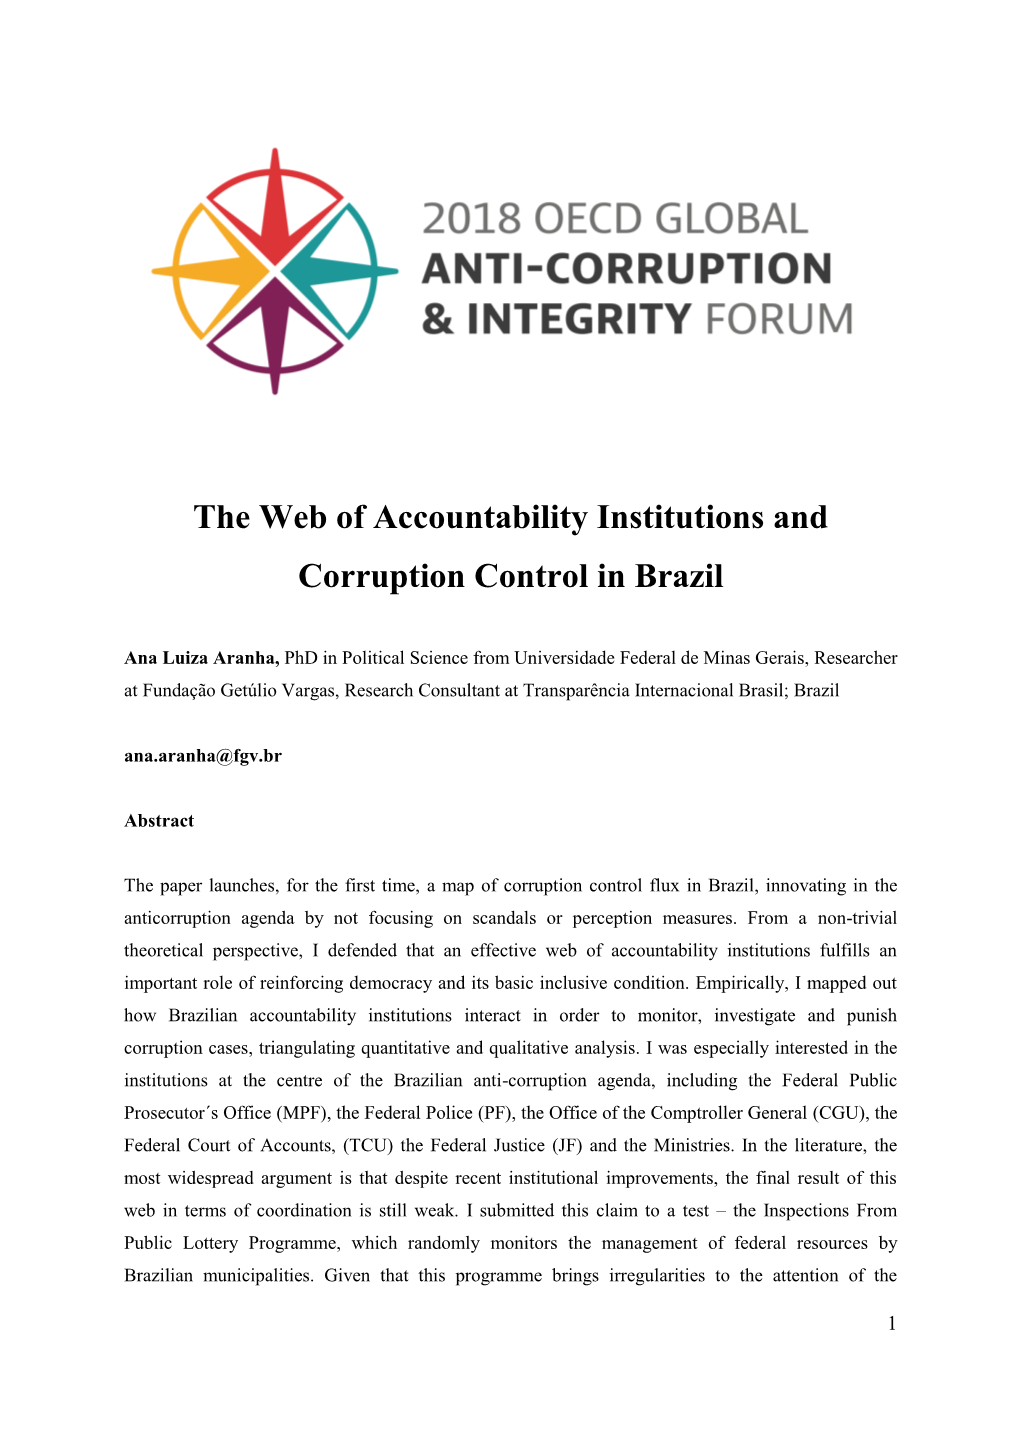 The Web of Accountability Institutions and Corruption Control in Brazil